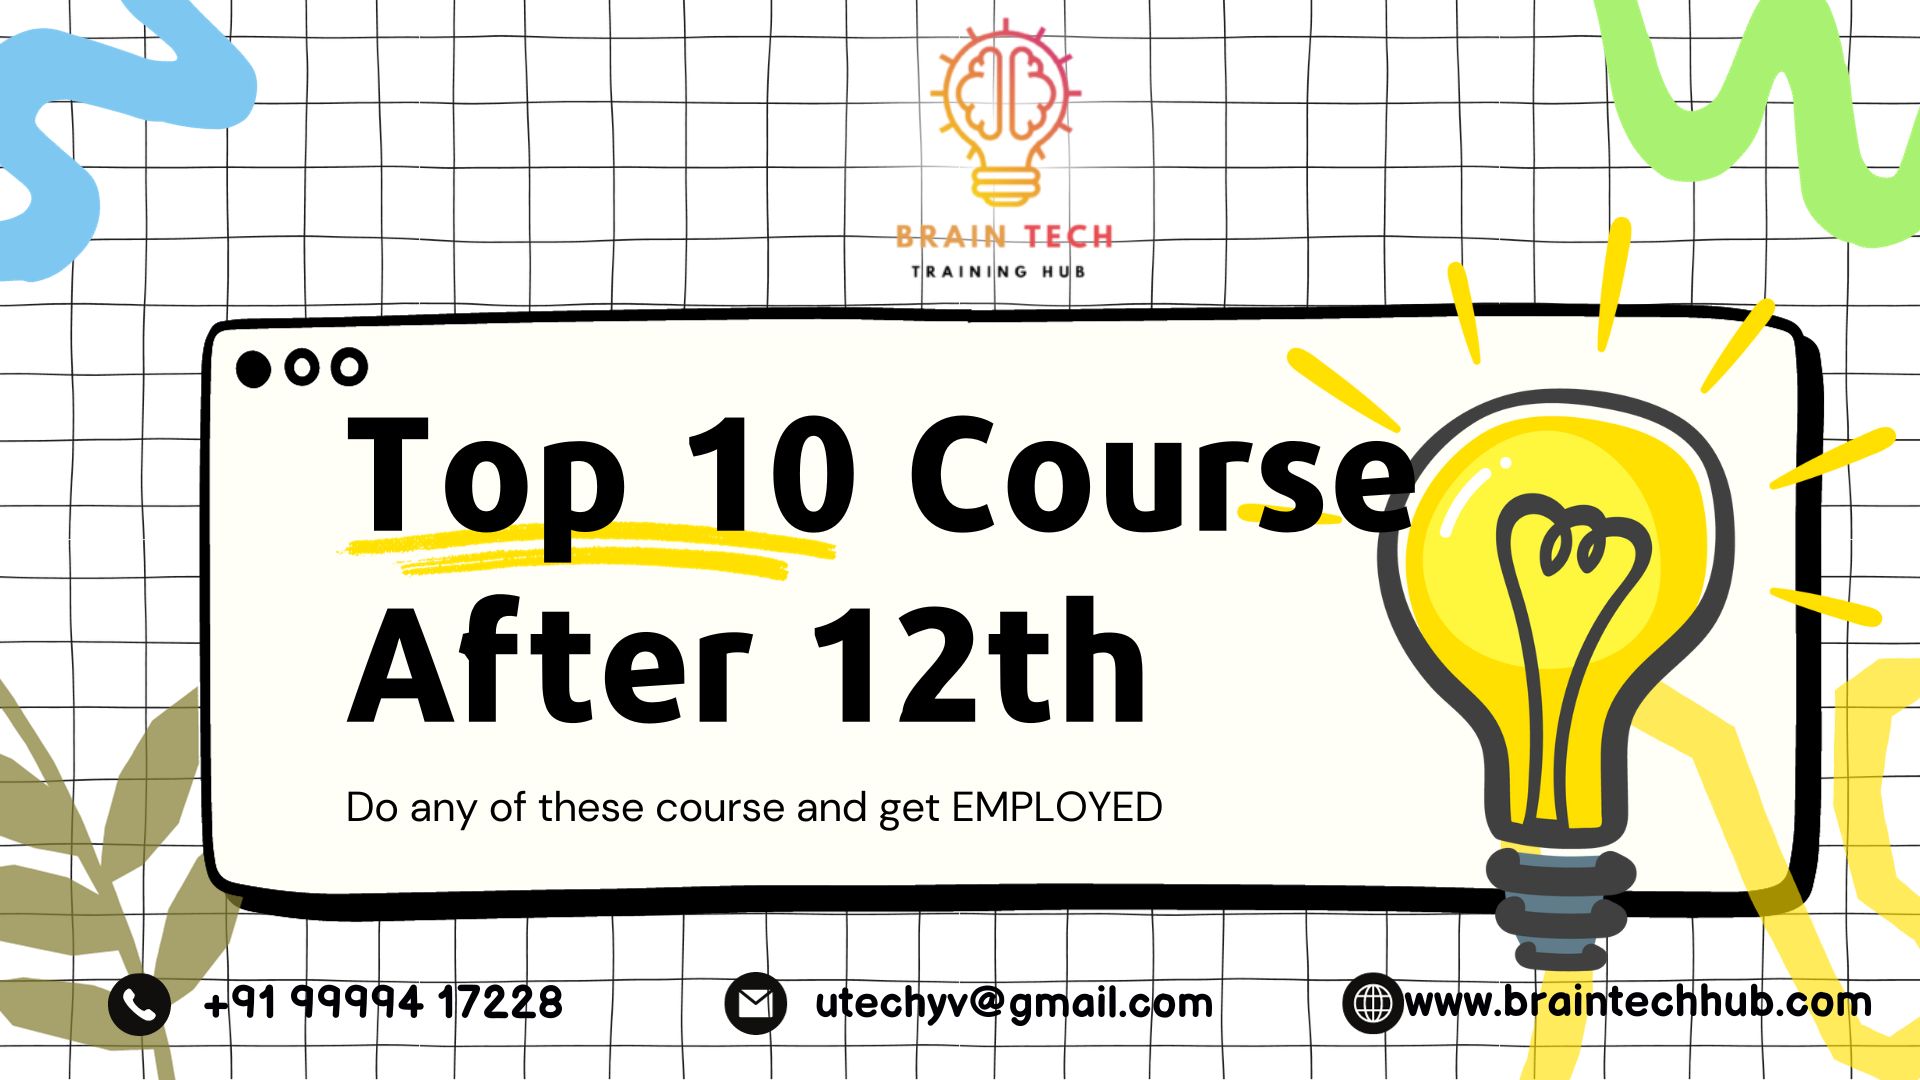 Top 10 Courses After 12th